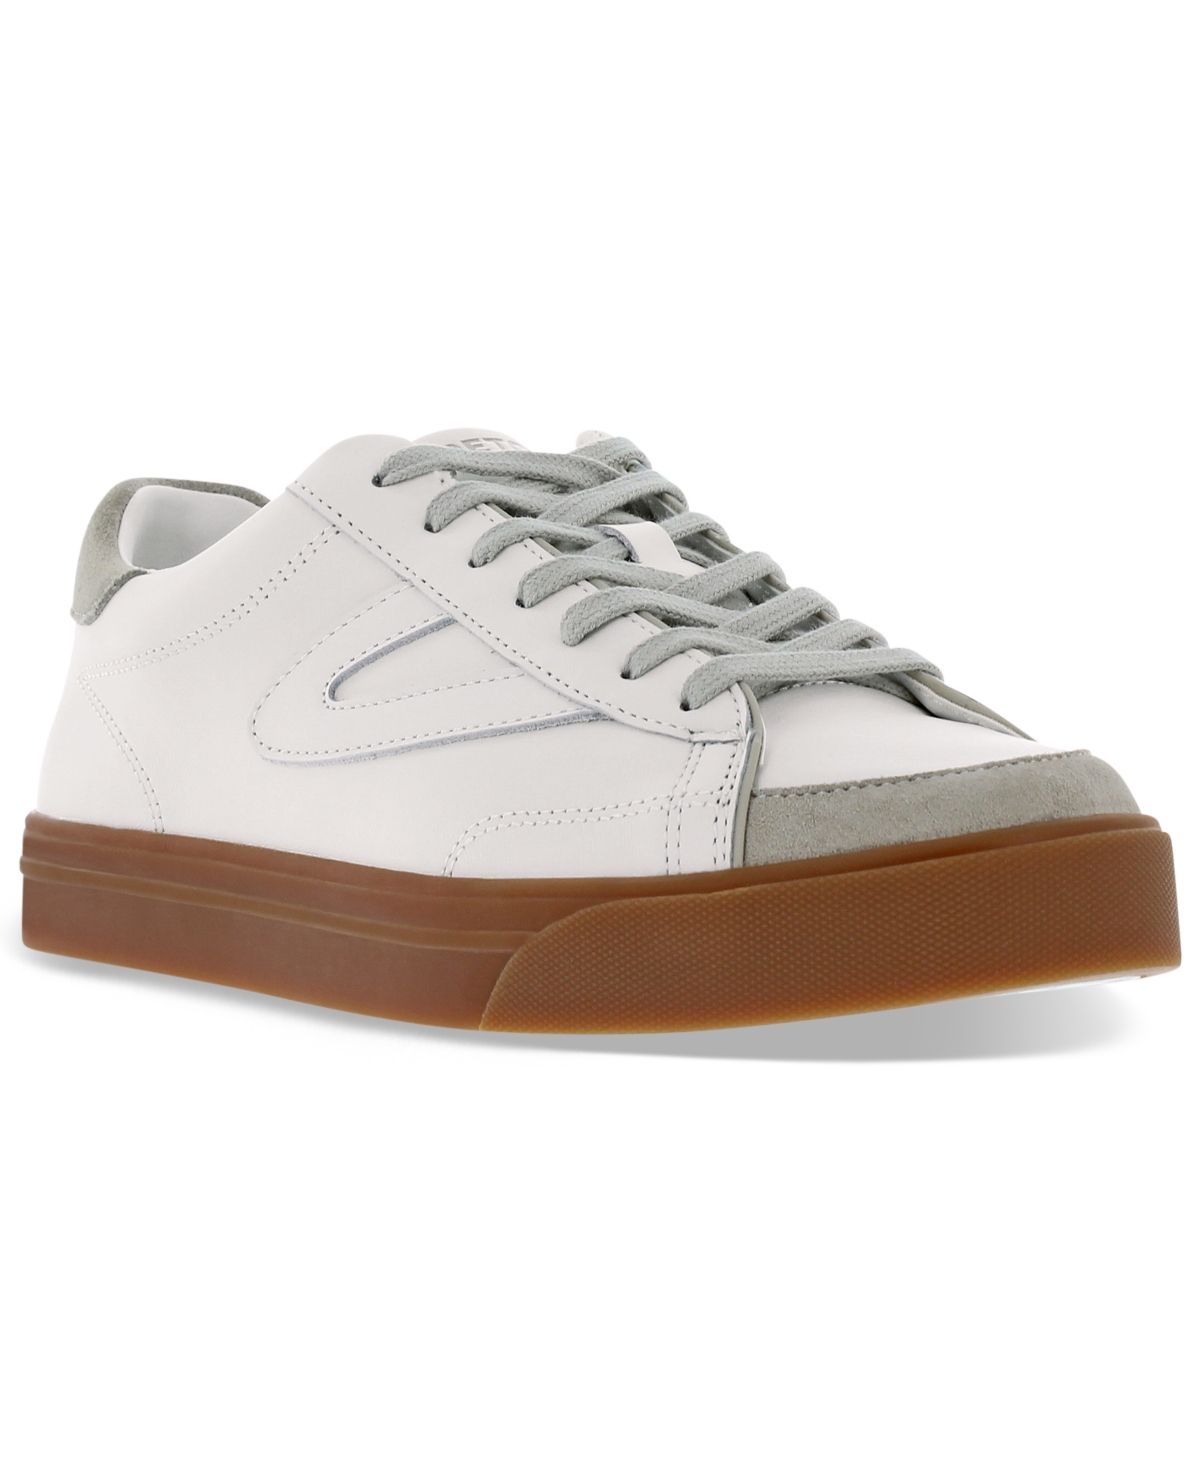 Men's Kick Serve Low Court Casual Sneakers from Finish Line - Bright White/Gum